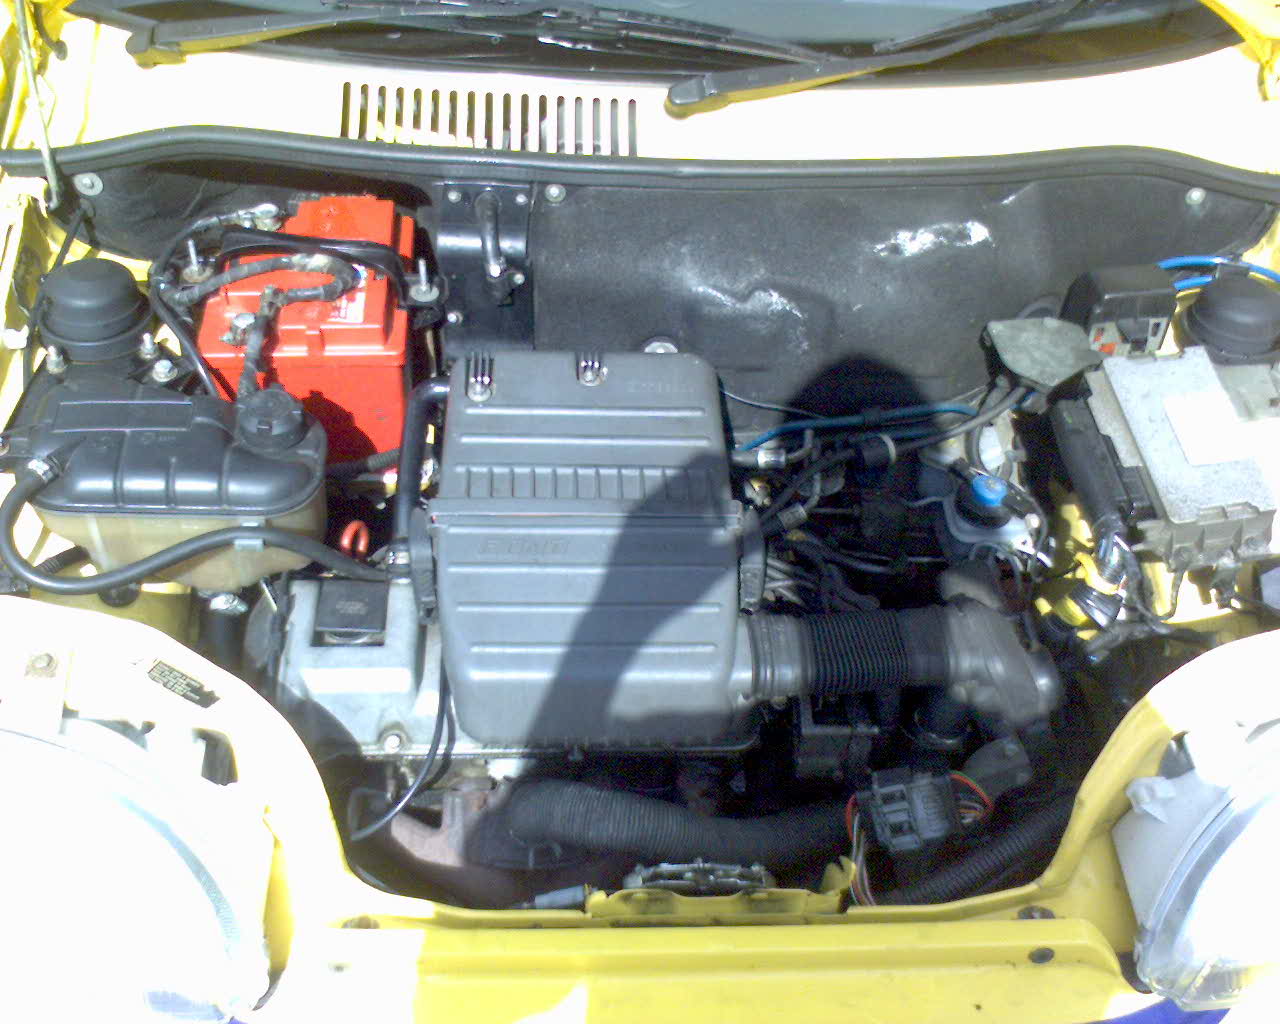 The 1.1 litre standard sporting engine!